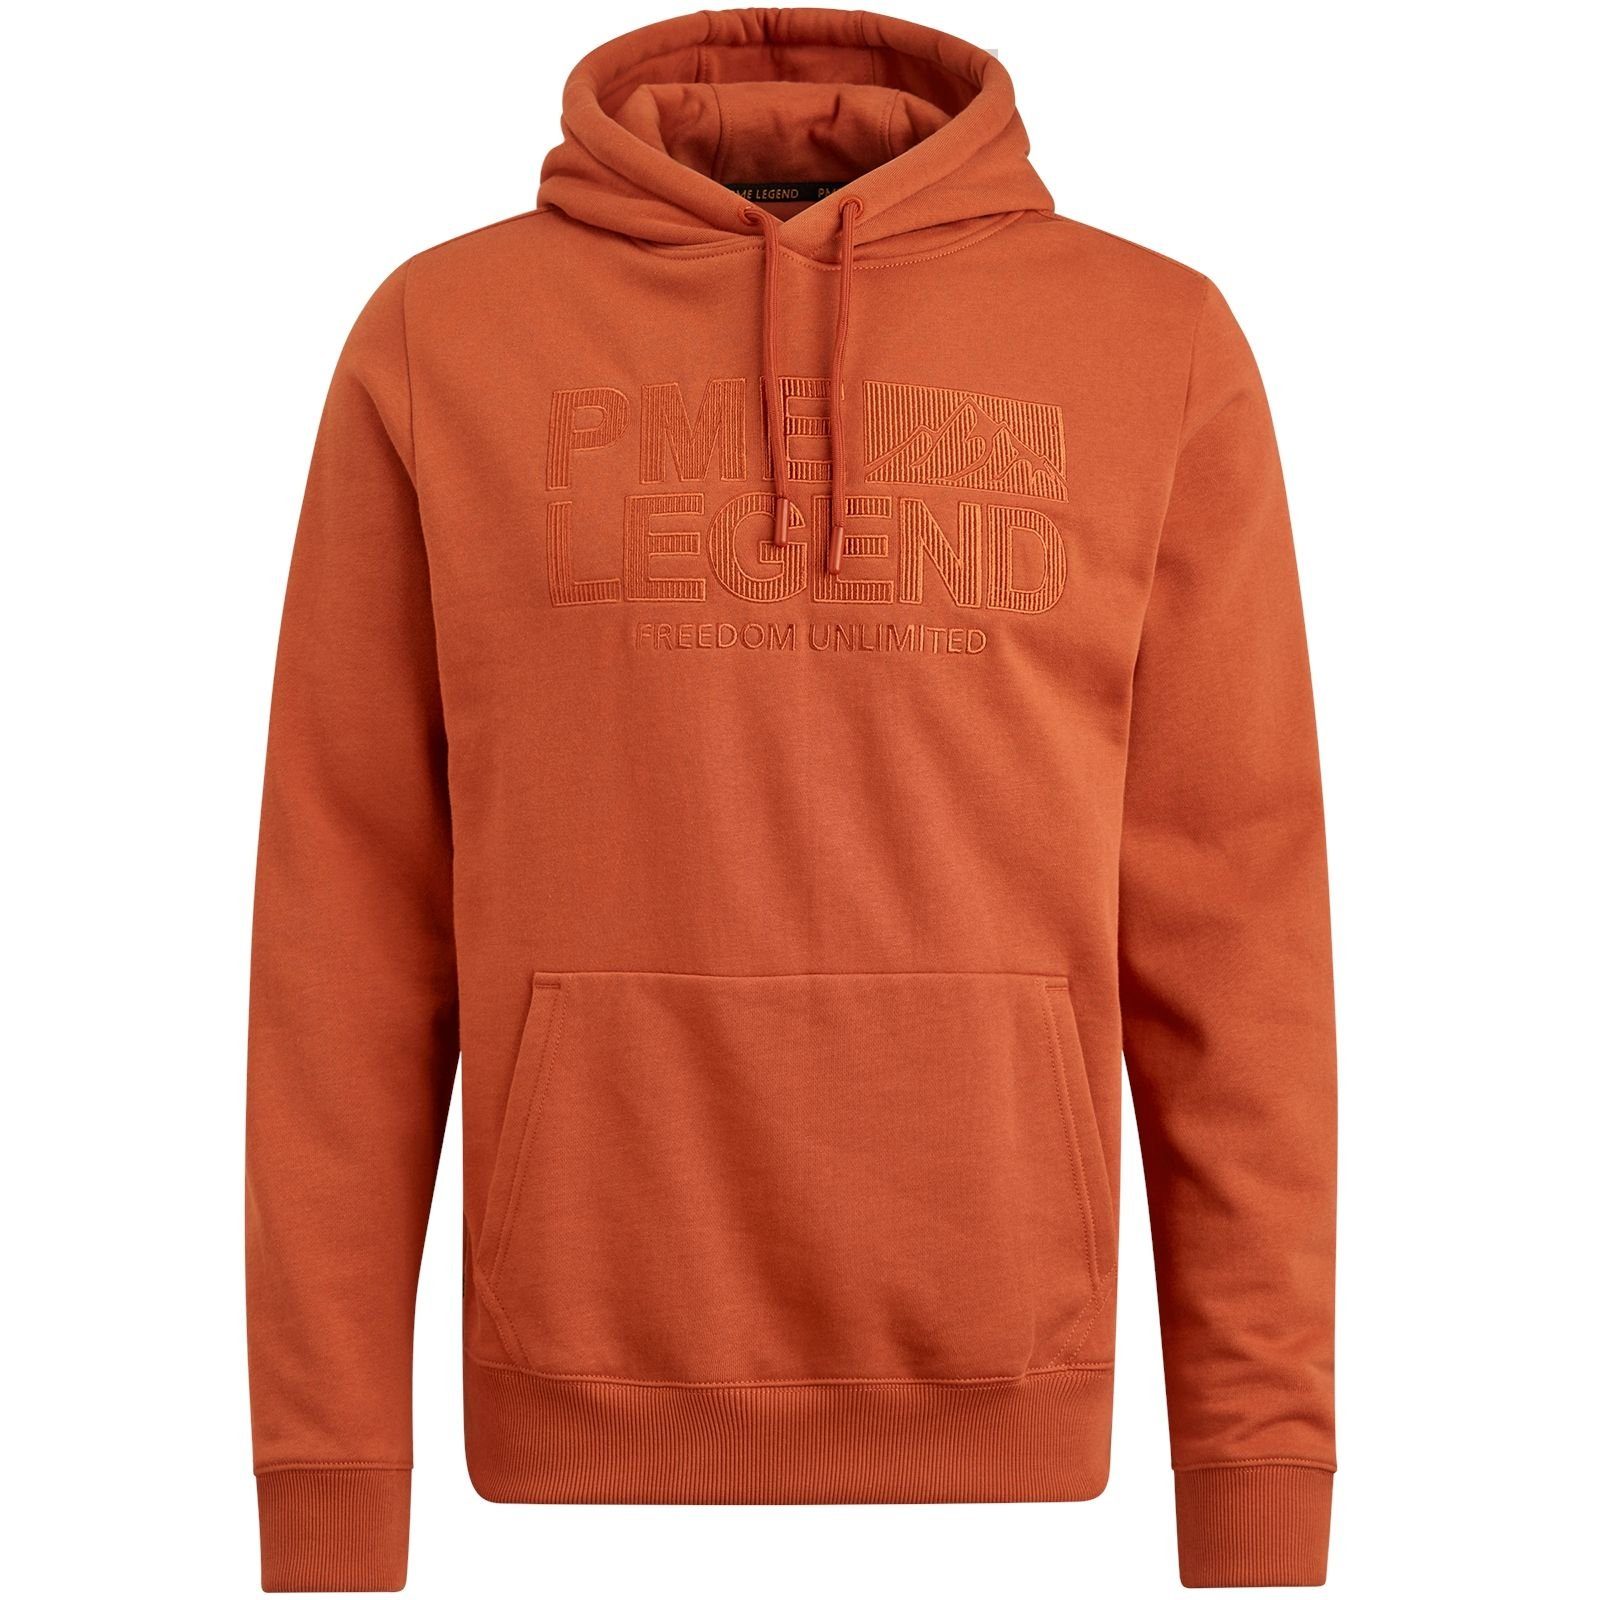 PME LEGEND Hoodie spice route